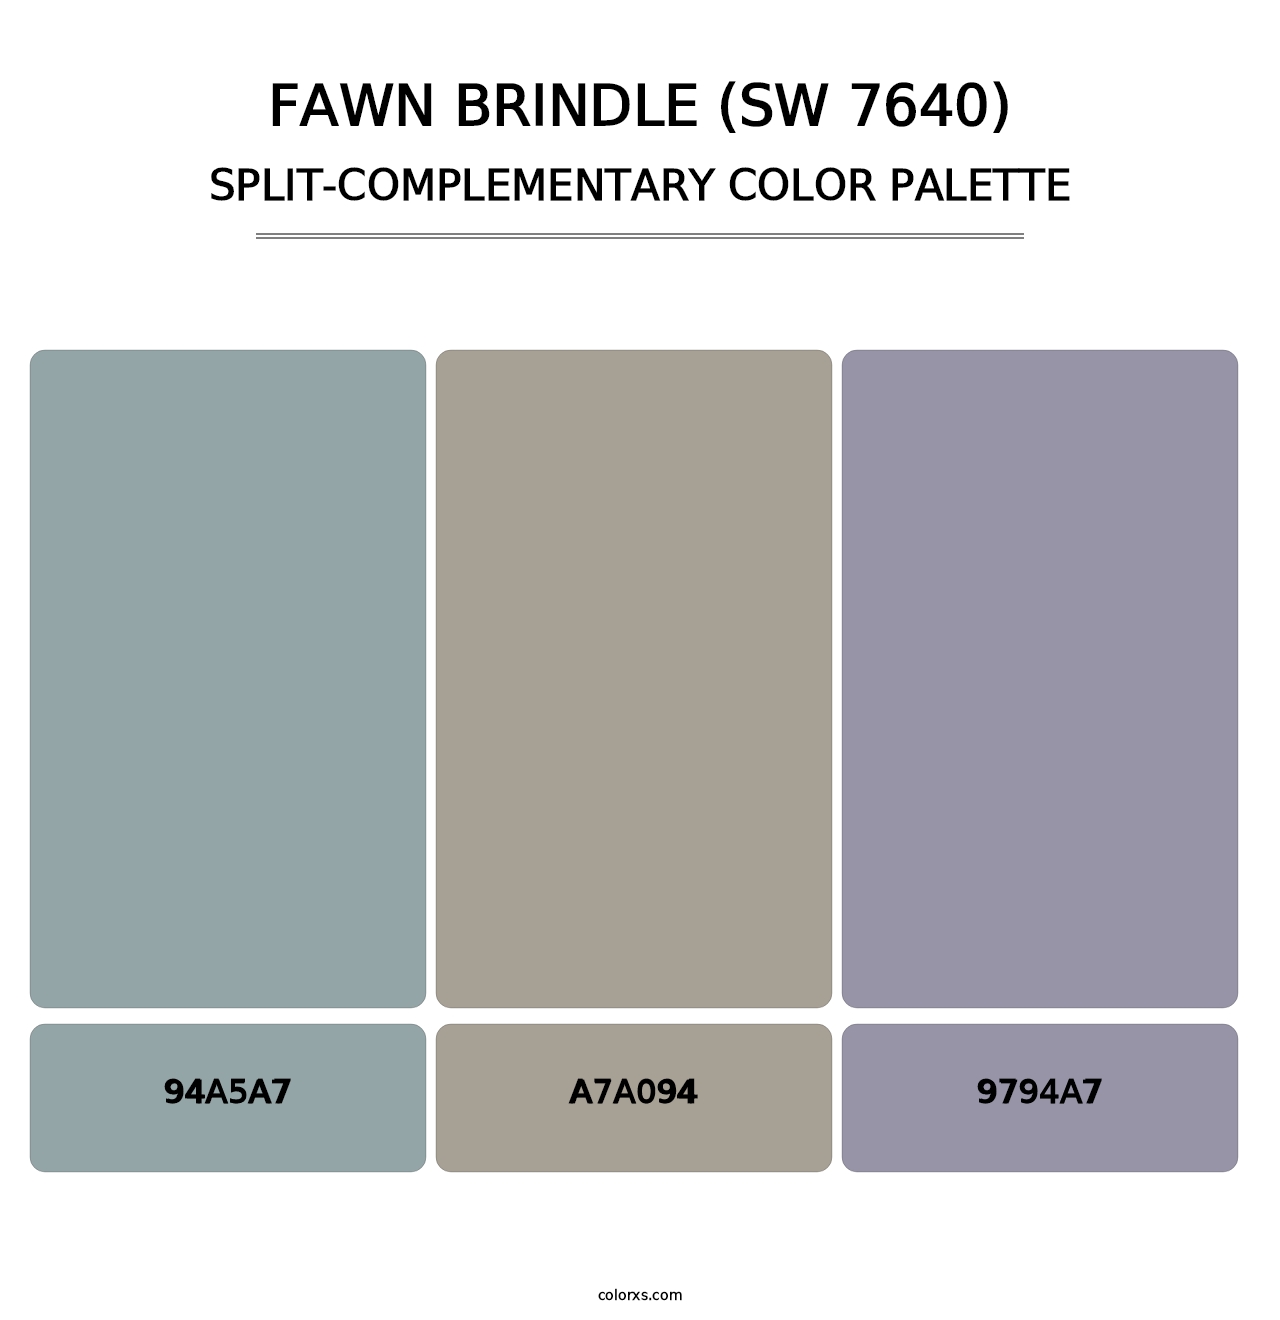 Fawn Brindle (SW 7640) - Split-Complementary Color Palette